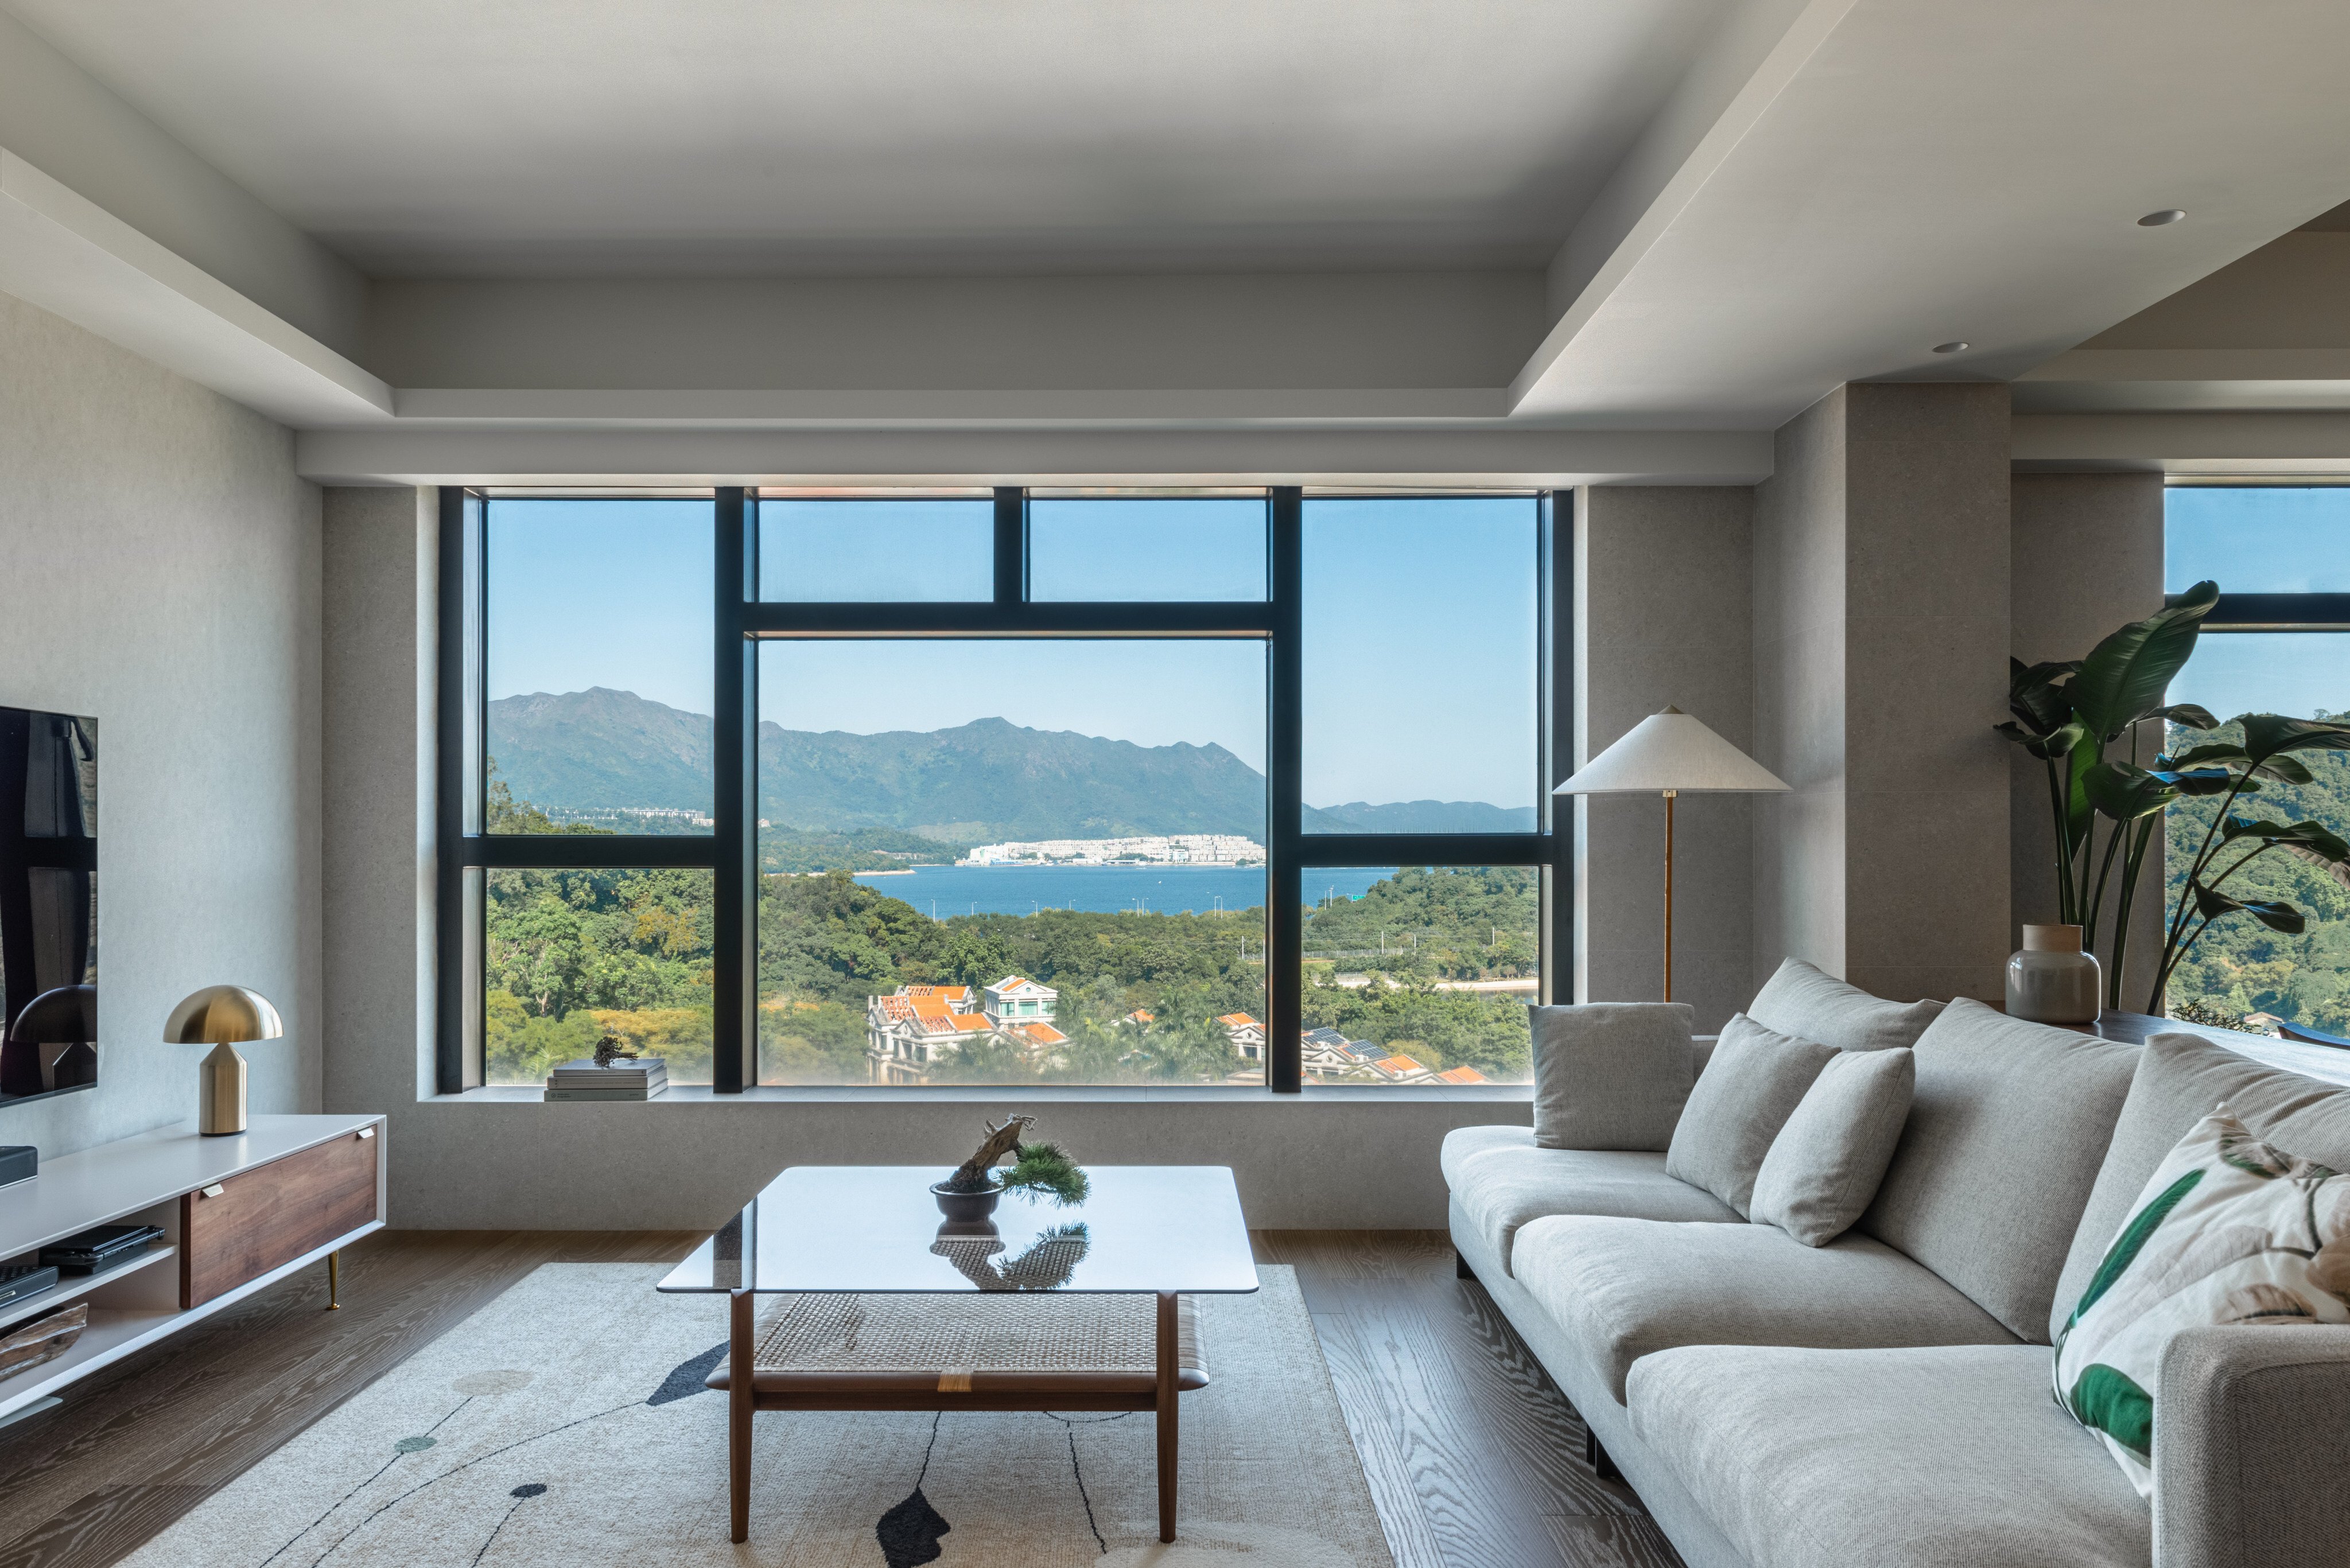 A couple’s flat in Tai Po, in the New Territories in Hong Kong, was transformed into a tranquil retreat. The living room windows have no blinds or curtains to make the most of the view of Plover Cove. Photo: YC Chen